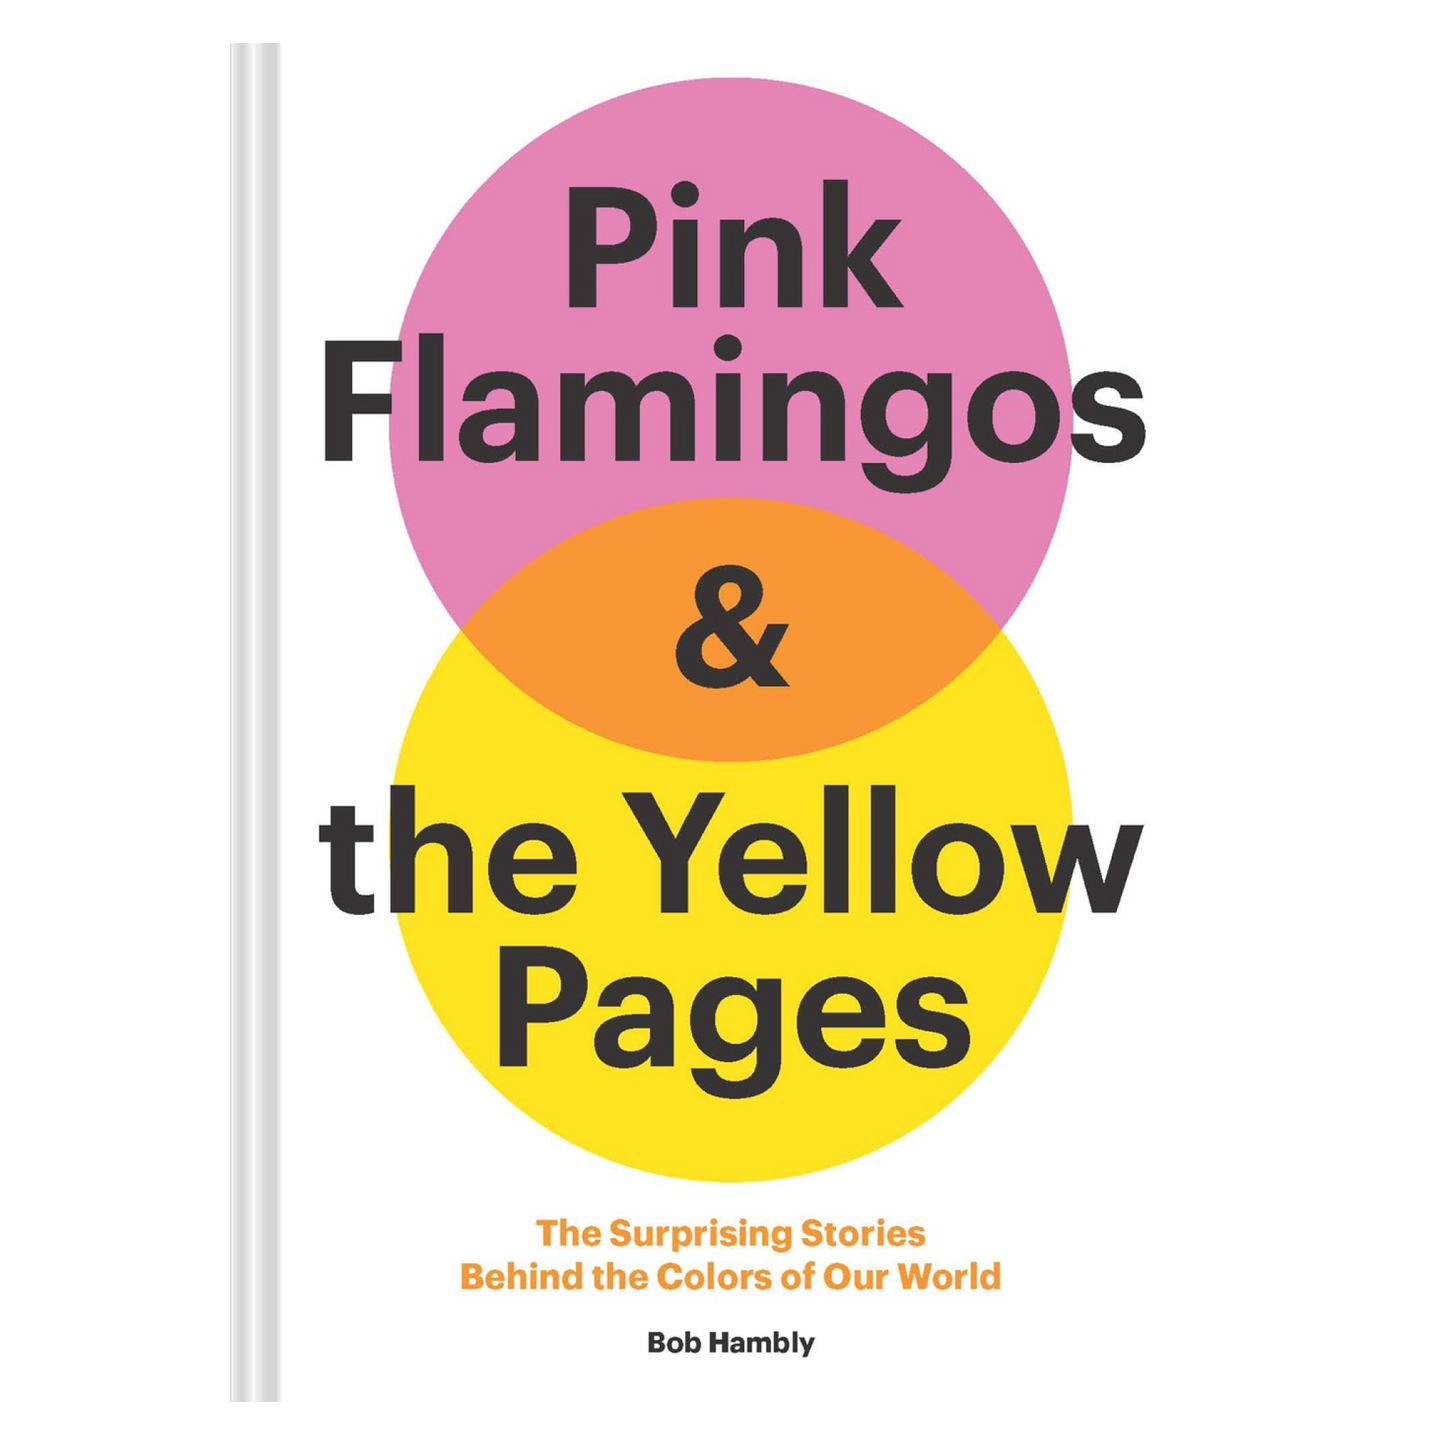 Pink Flamingos & the Yellow Pages